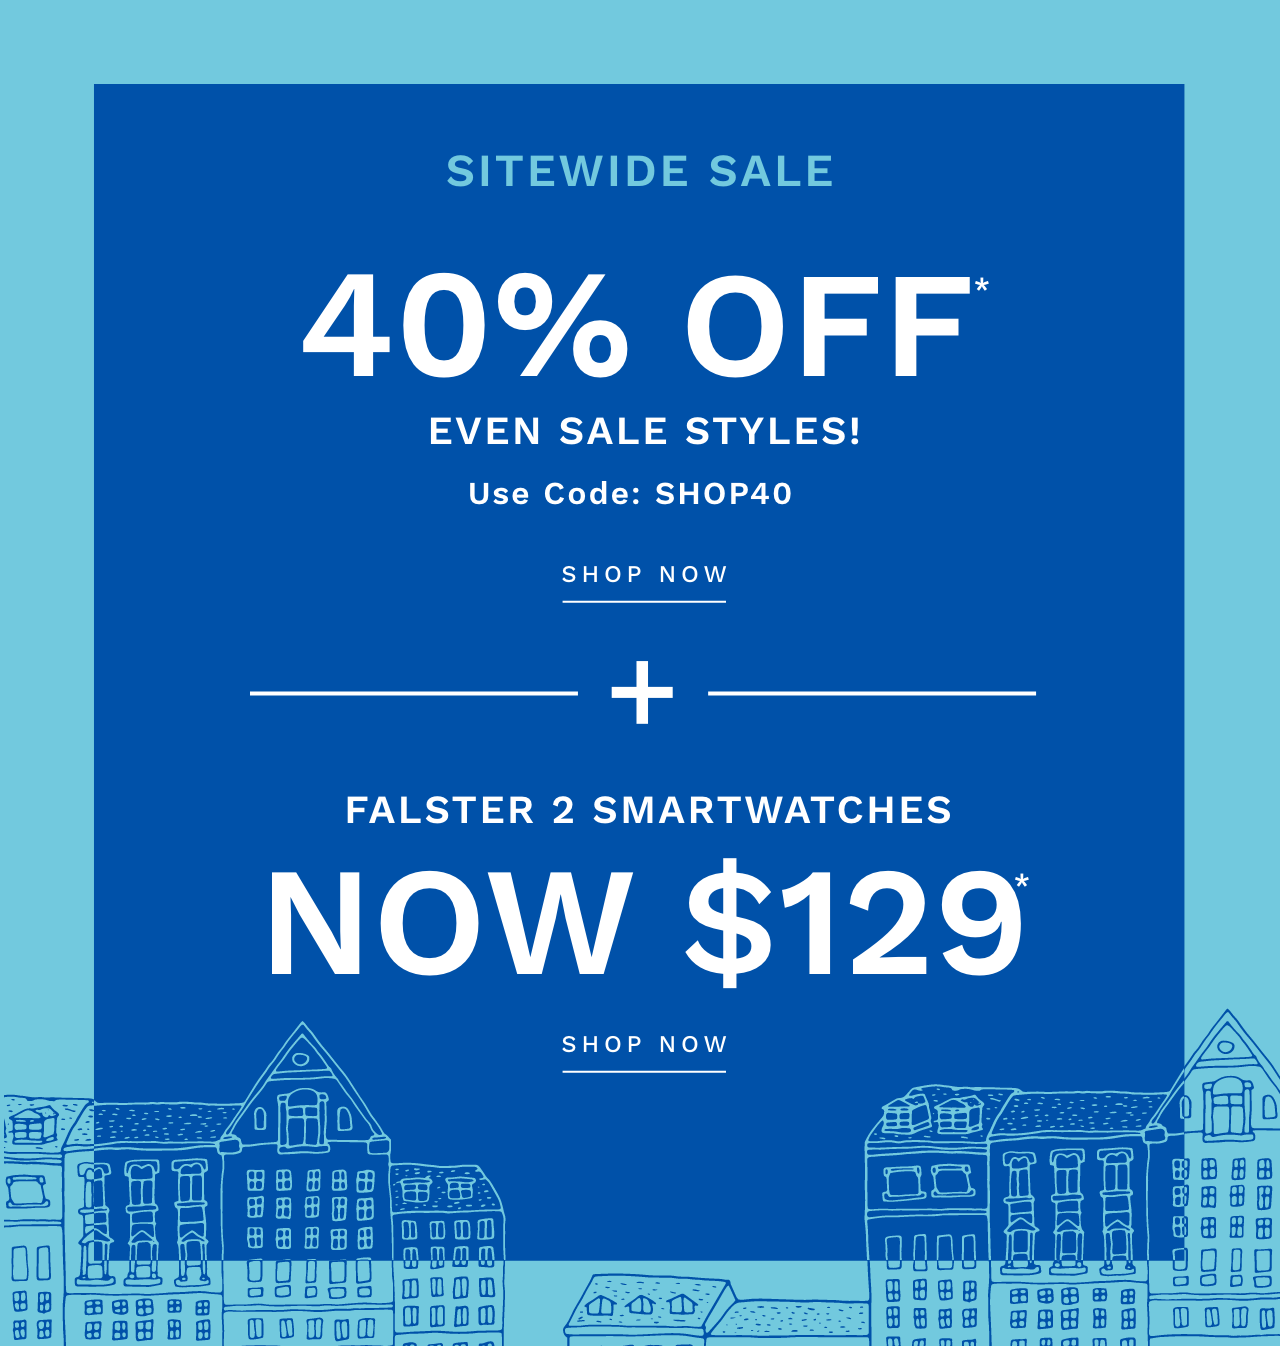 Sitewide Sale 40%* Off Sale + Falster 2 Smartwatches Now $129